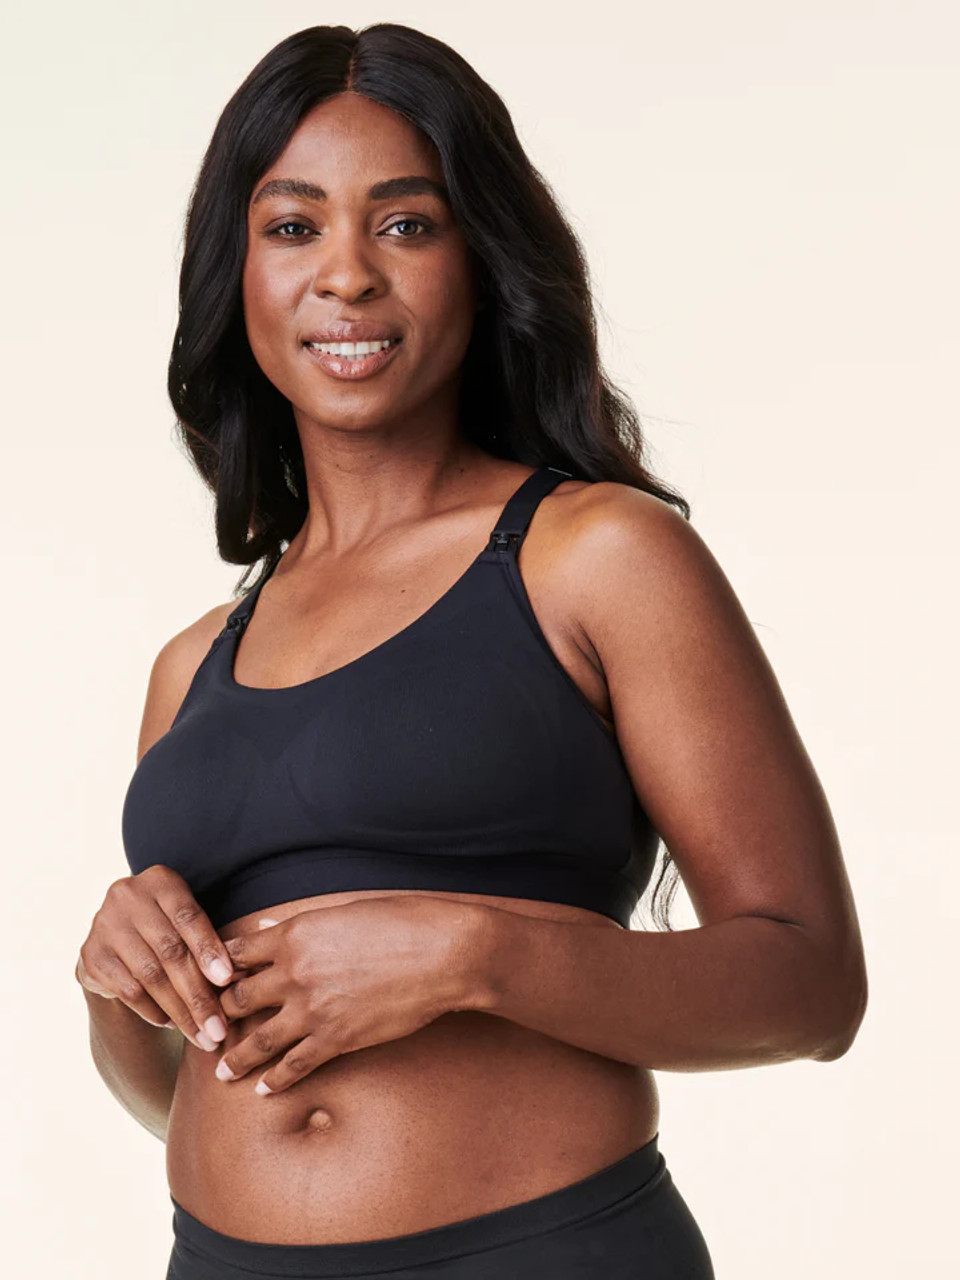 All Products Maternity Sports Bras.